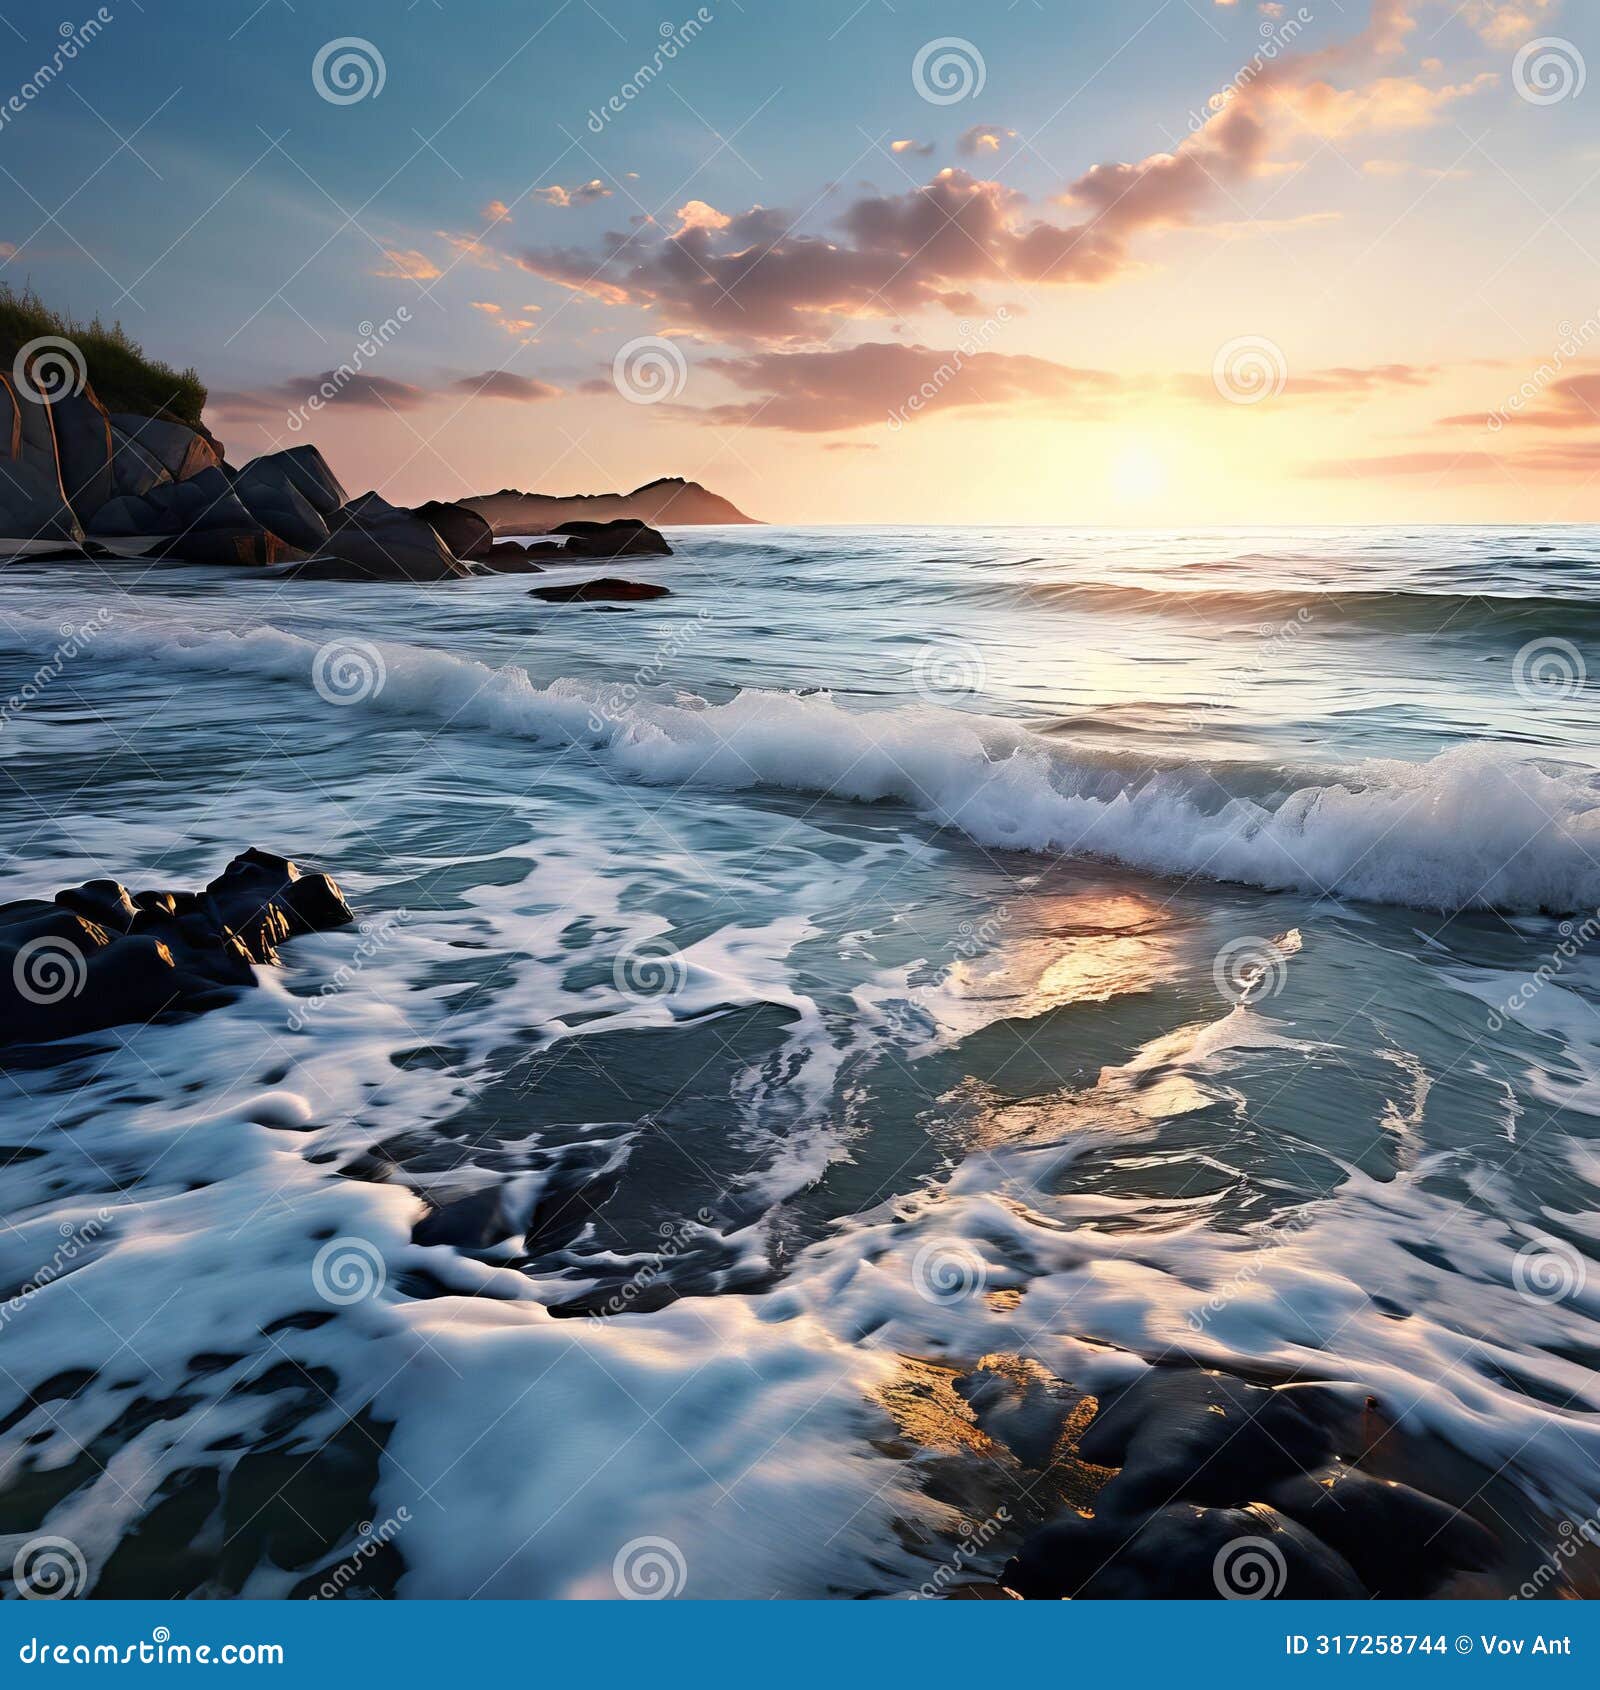 coastal scene with waves gently lapping at the shore k uhd ver